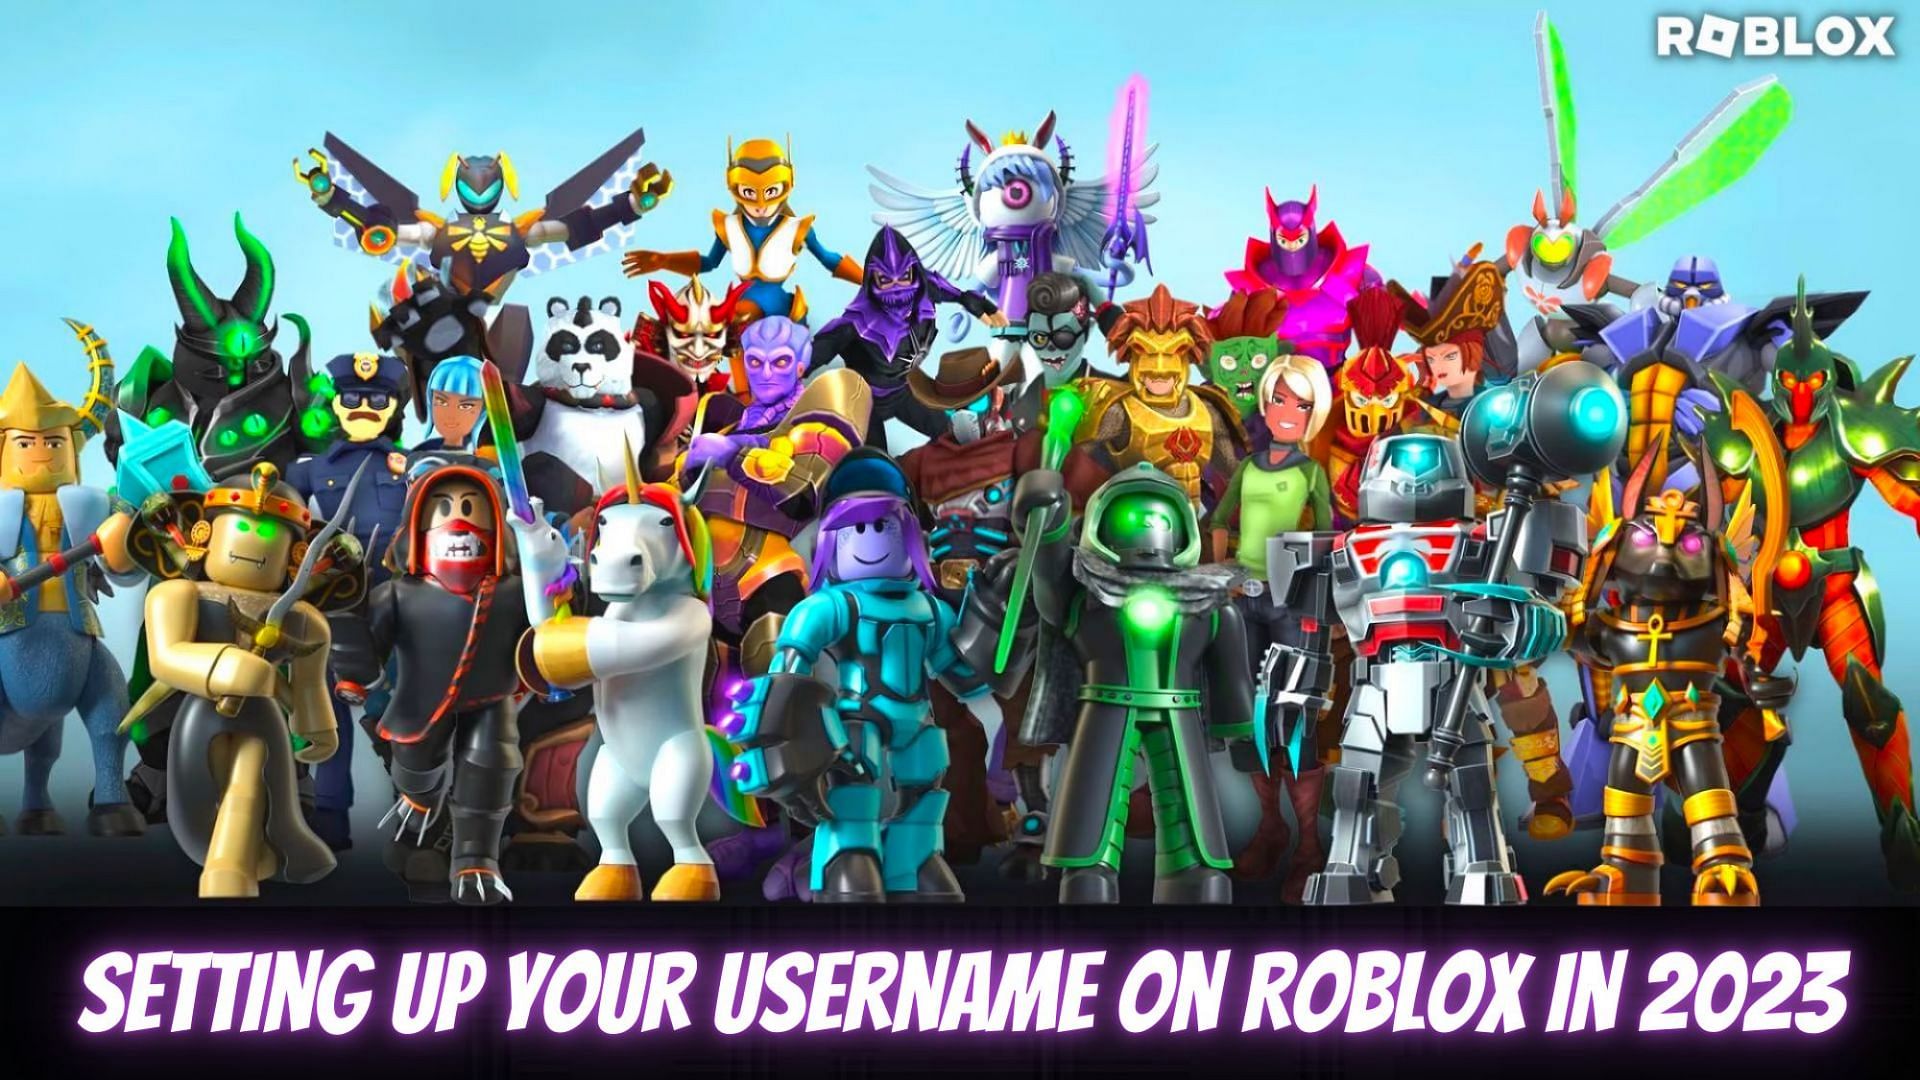 Setting up your username on Roblox in 2023